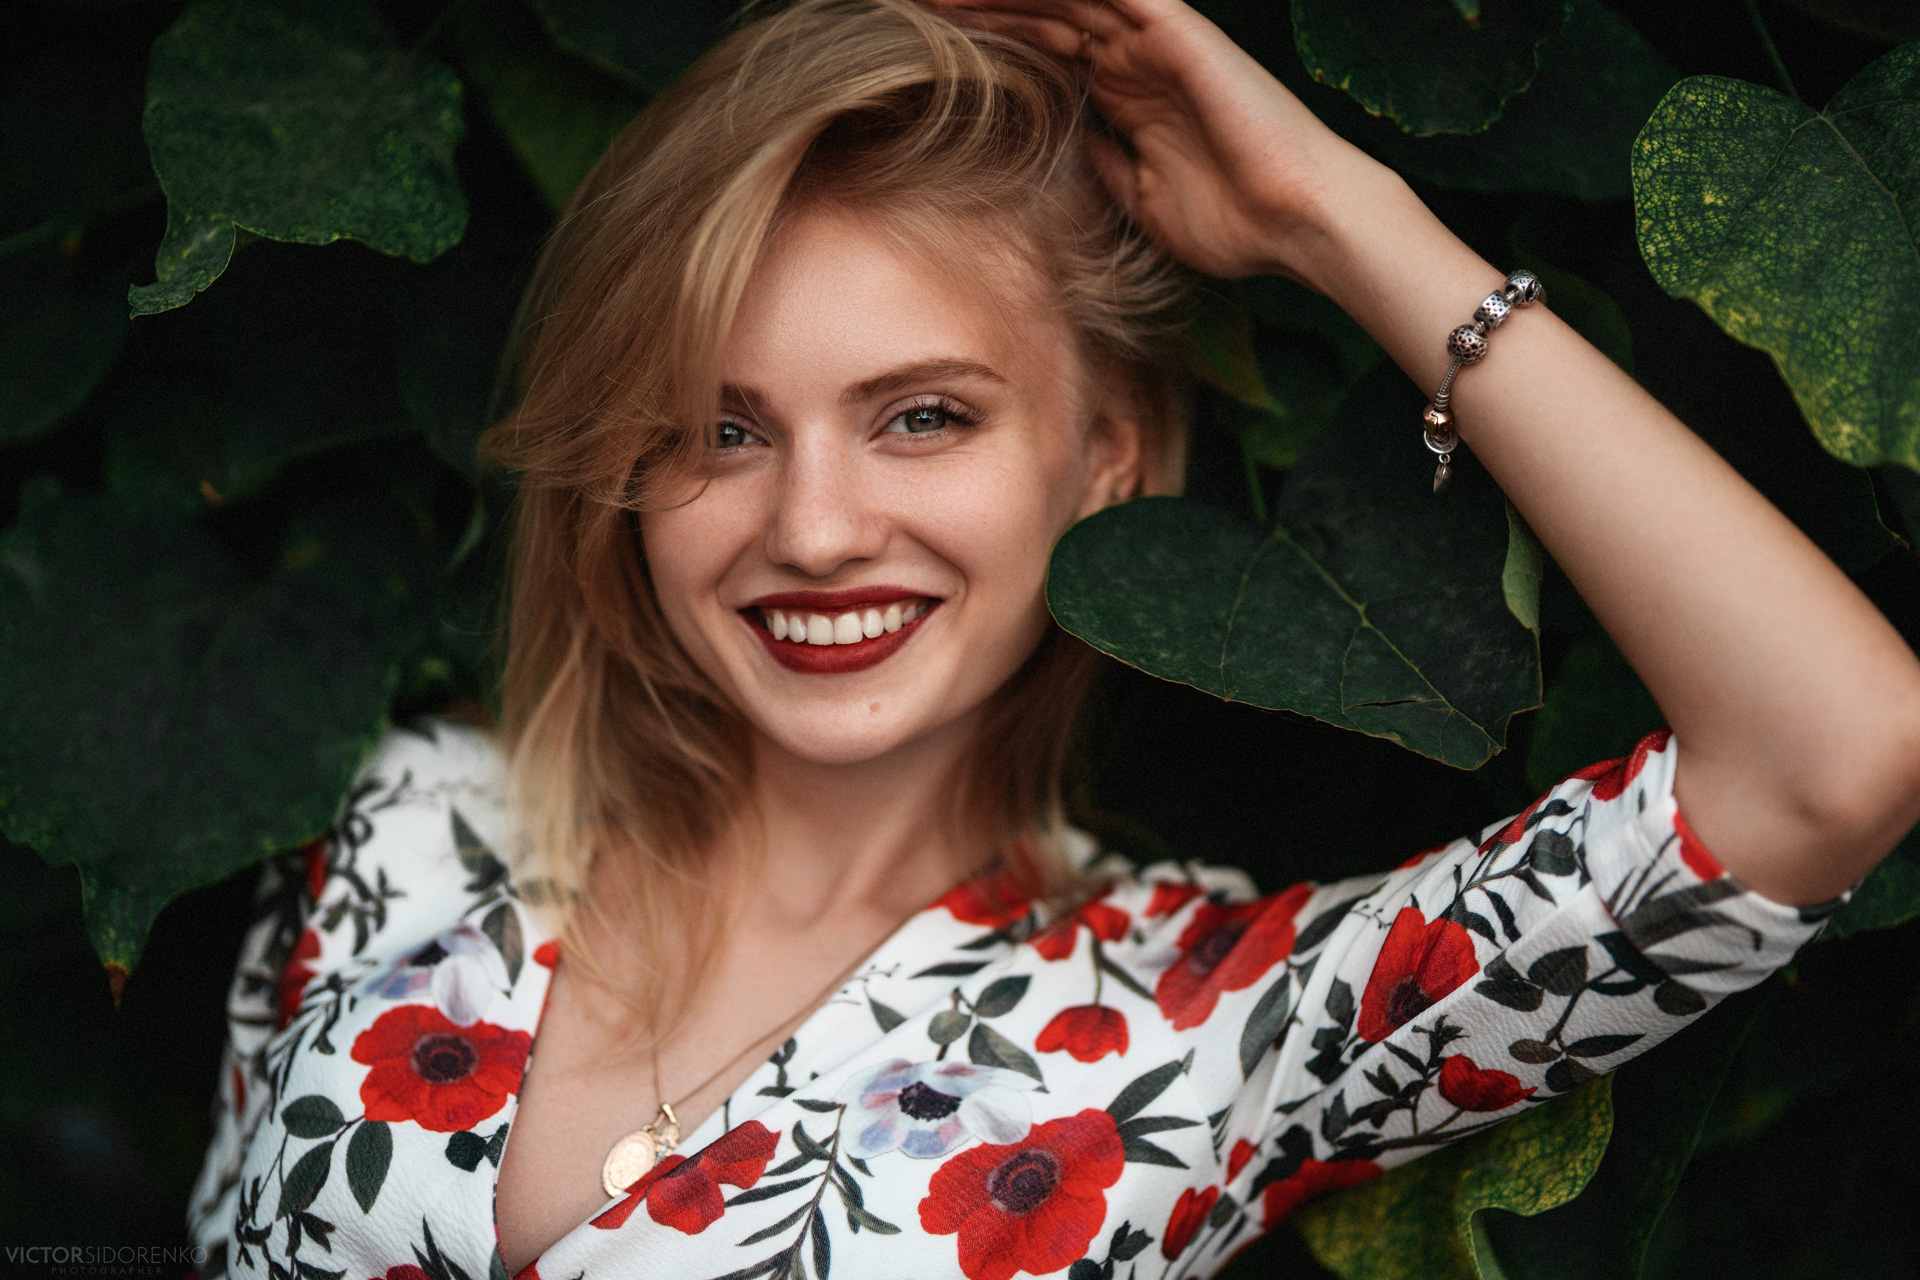 People 1920x1280 Katrin Enina Victor Sidorenko women model blonde touching hair looking at viewer smiling red lipstick necklace bracelets leaves plants teeth bokeh outdoors women outdoors face portrait photography closeup watermarked